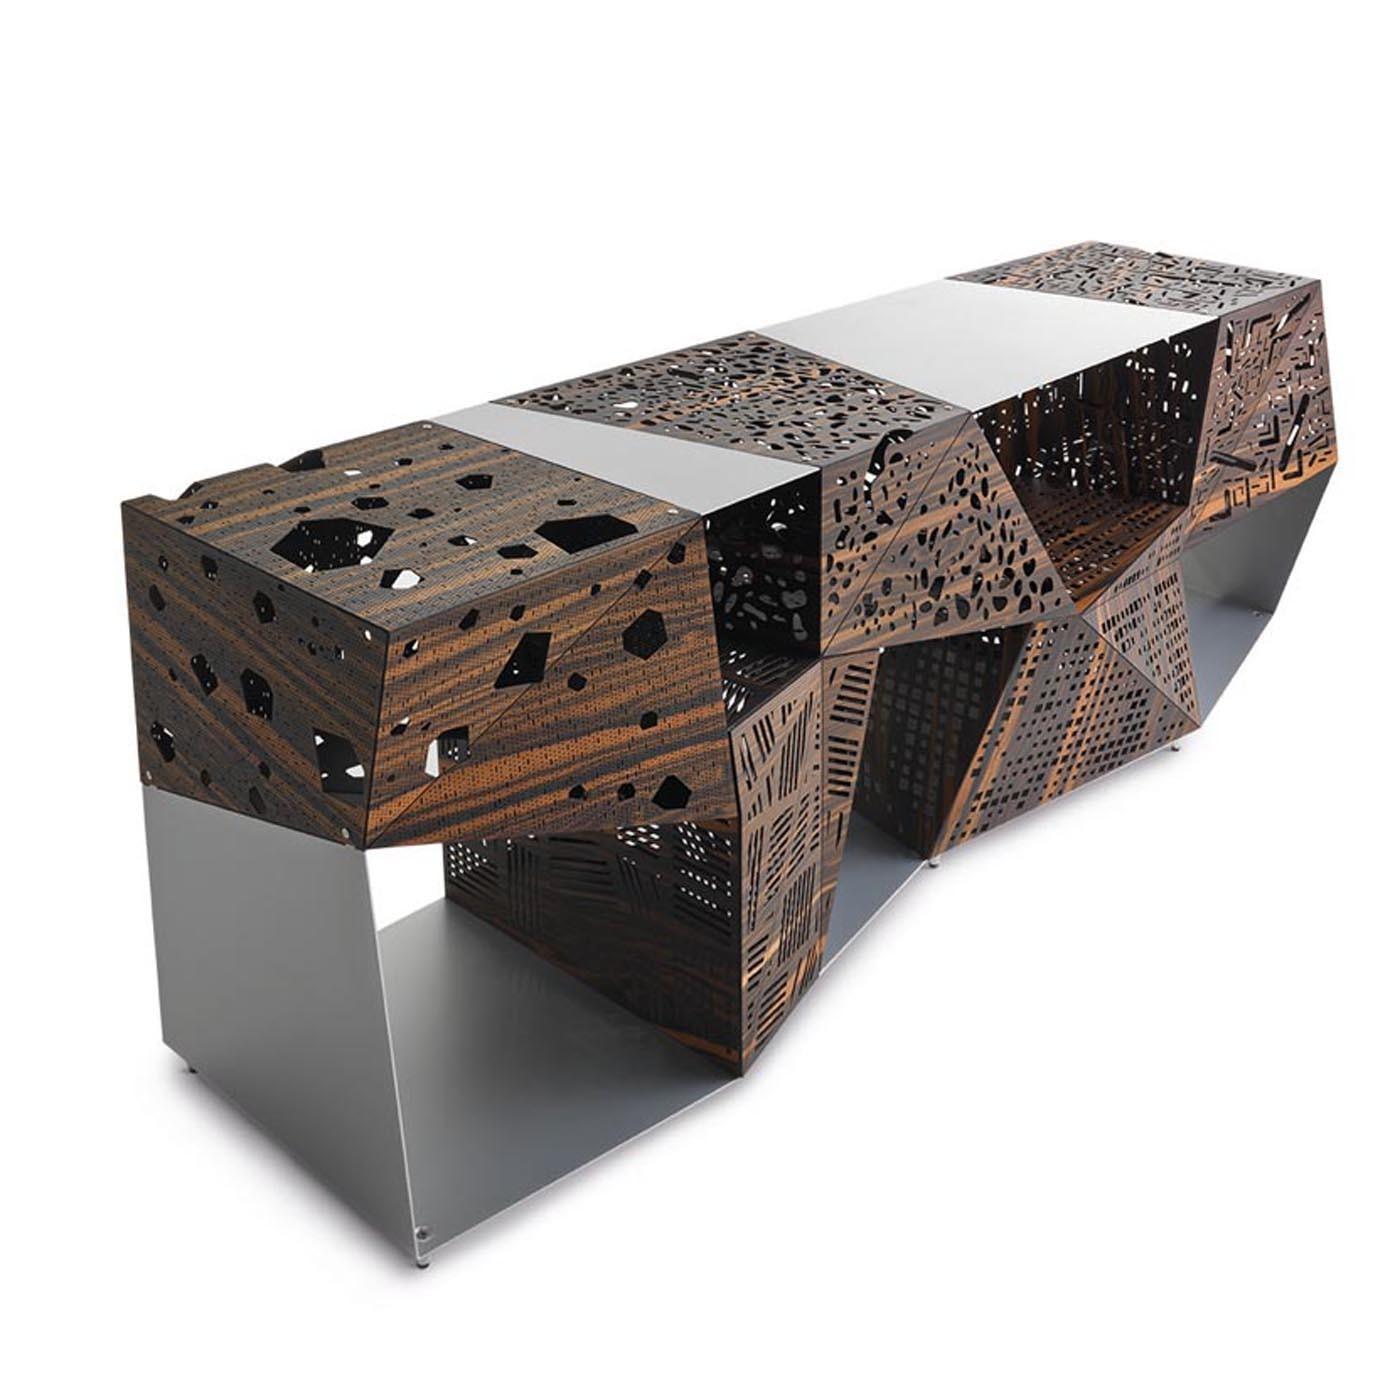 Designed by Steven Holl, this captivating and stunning sideboard is a sculptural objet d'art, exquisitely crafted with meticulous attention to details. It comprises an aluminum frame enclosing five containers of different geometric shapes, equipped